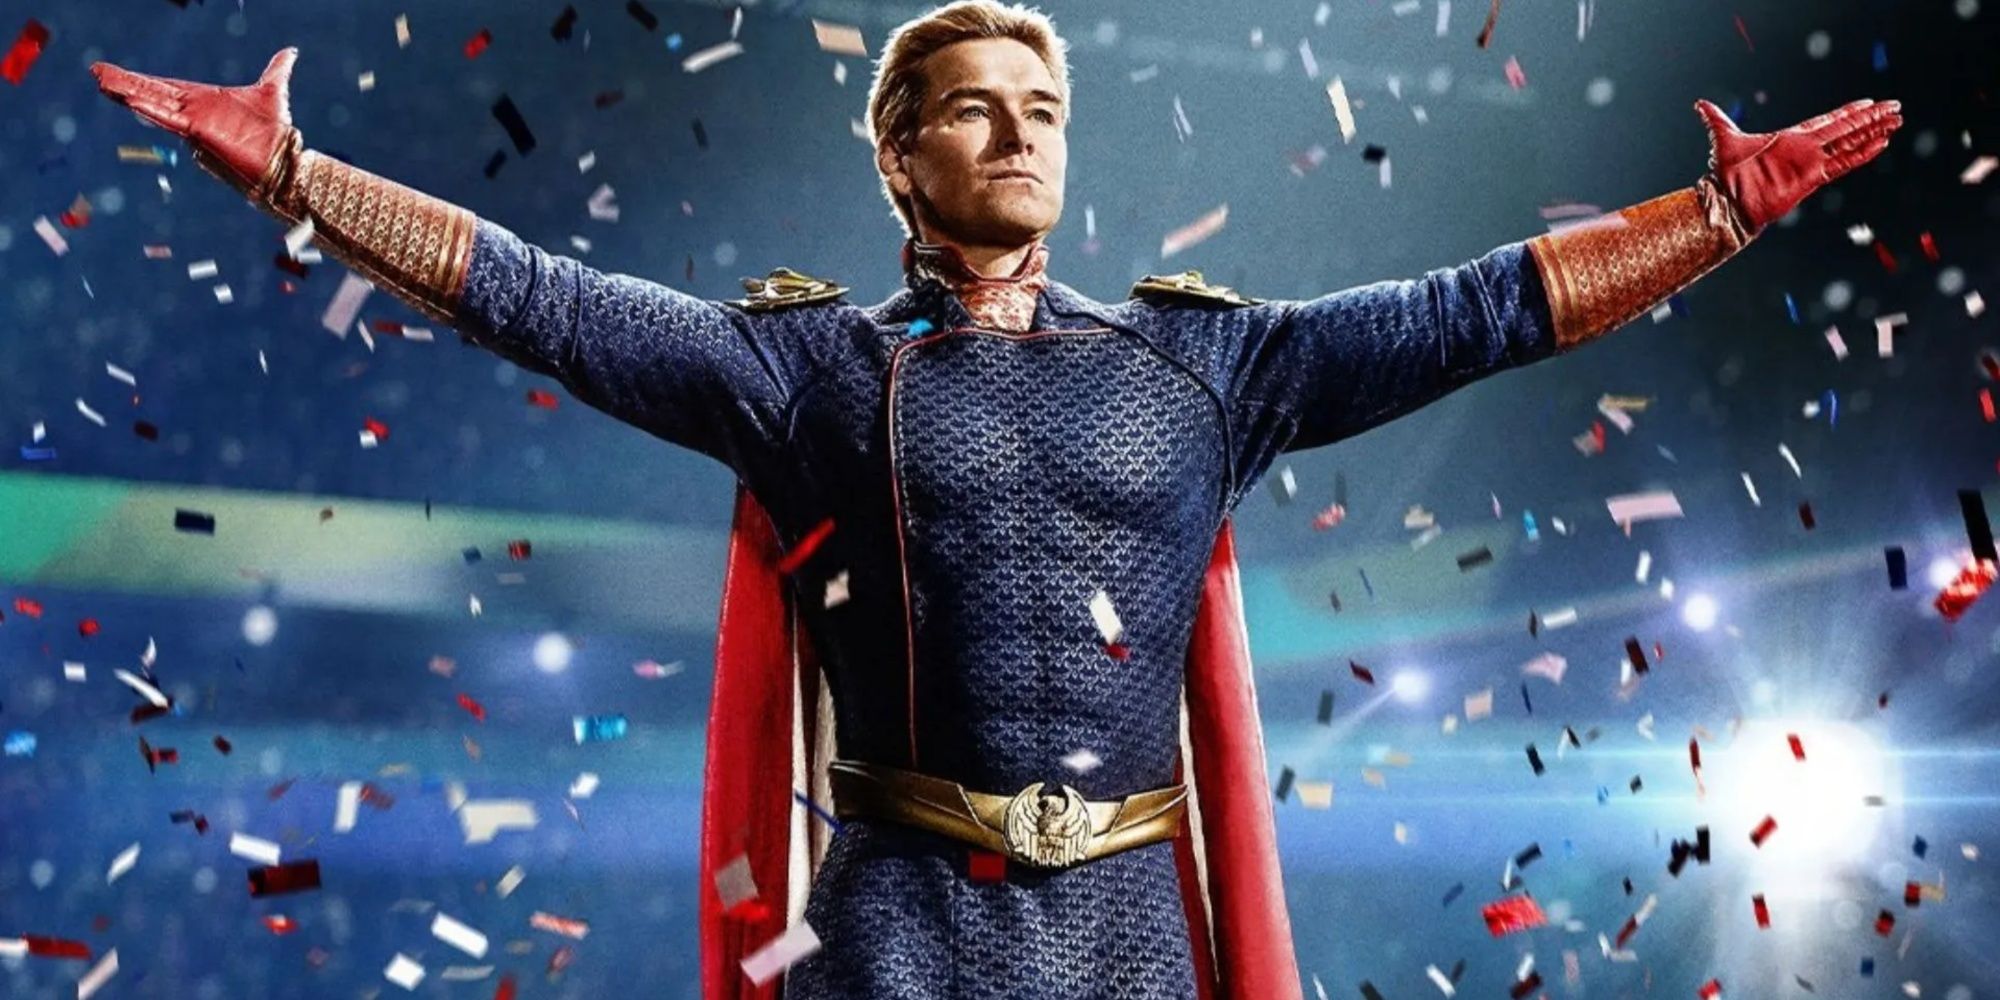 homelander with his arms outstretched being showered with confetti